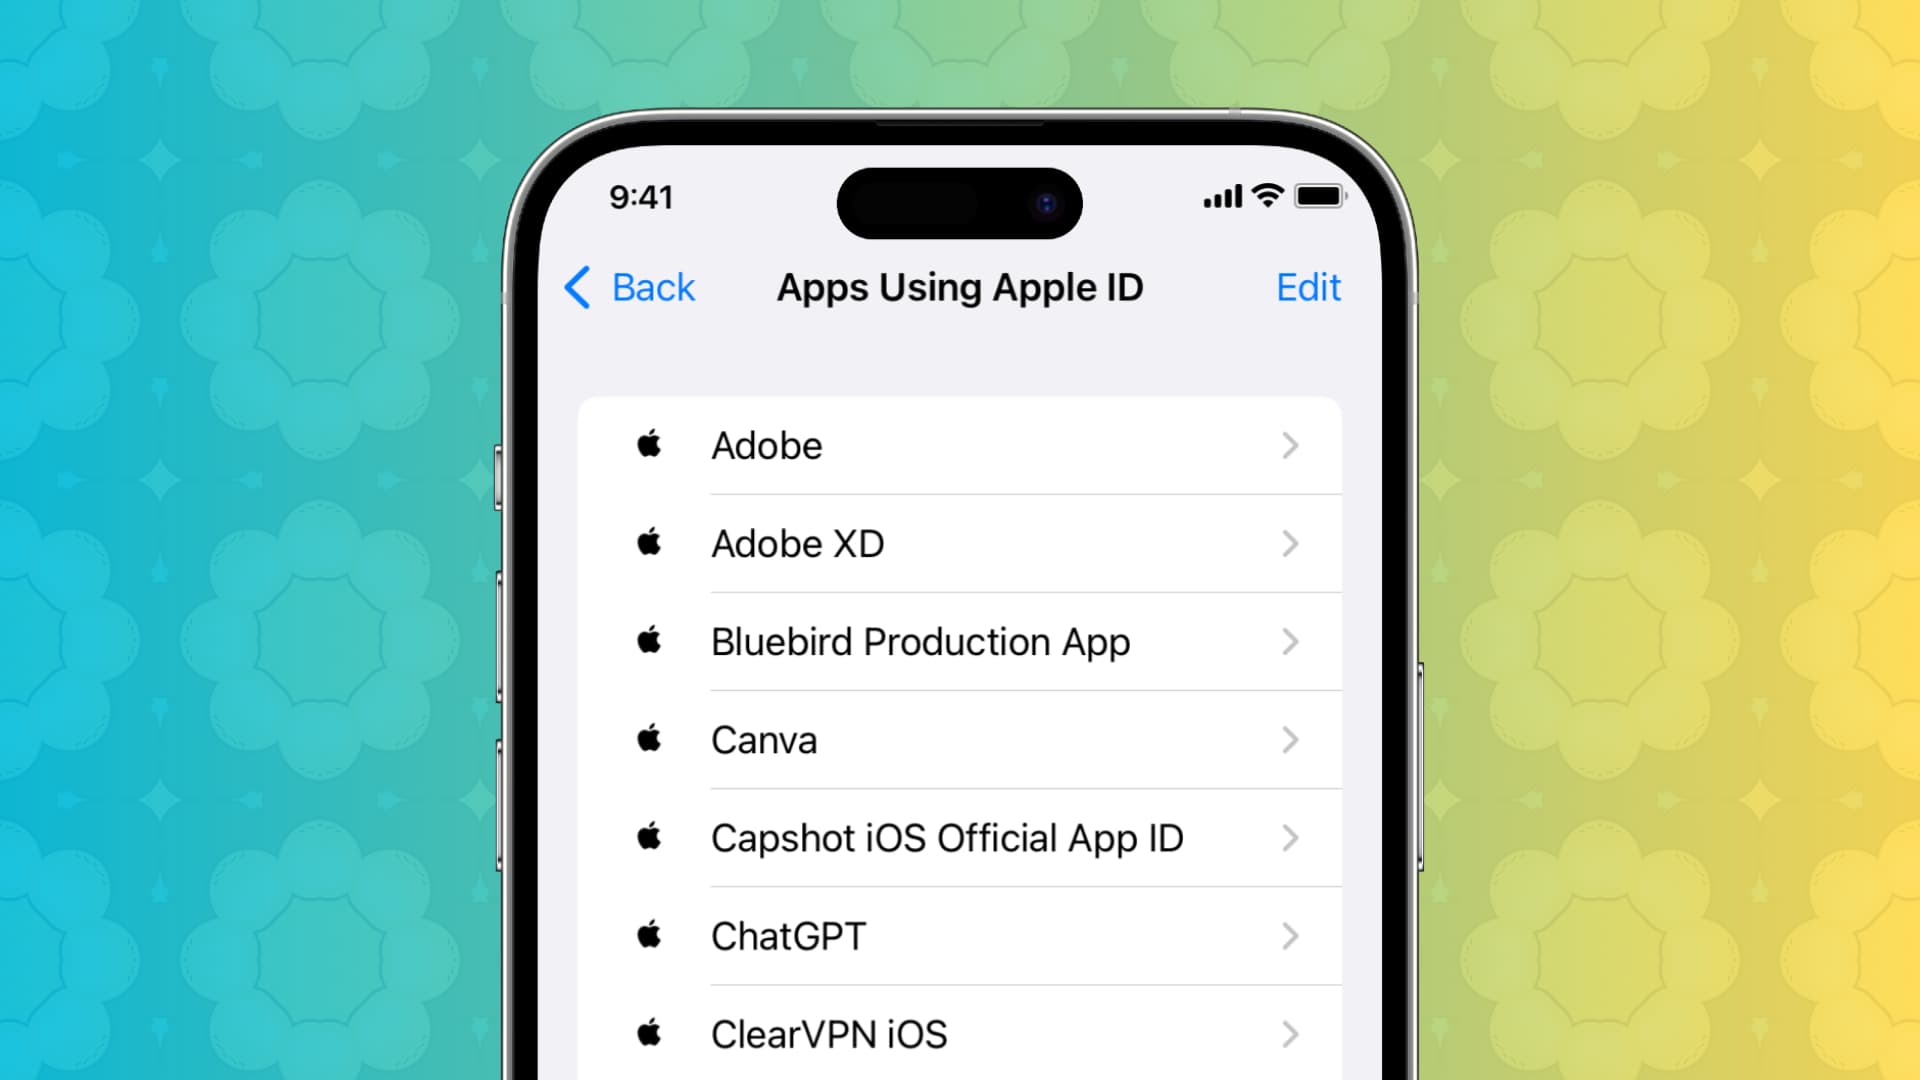 Apps using Apple ID listed in iPhone settings